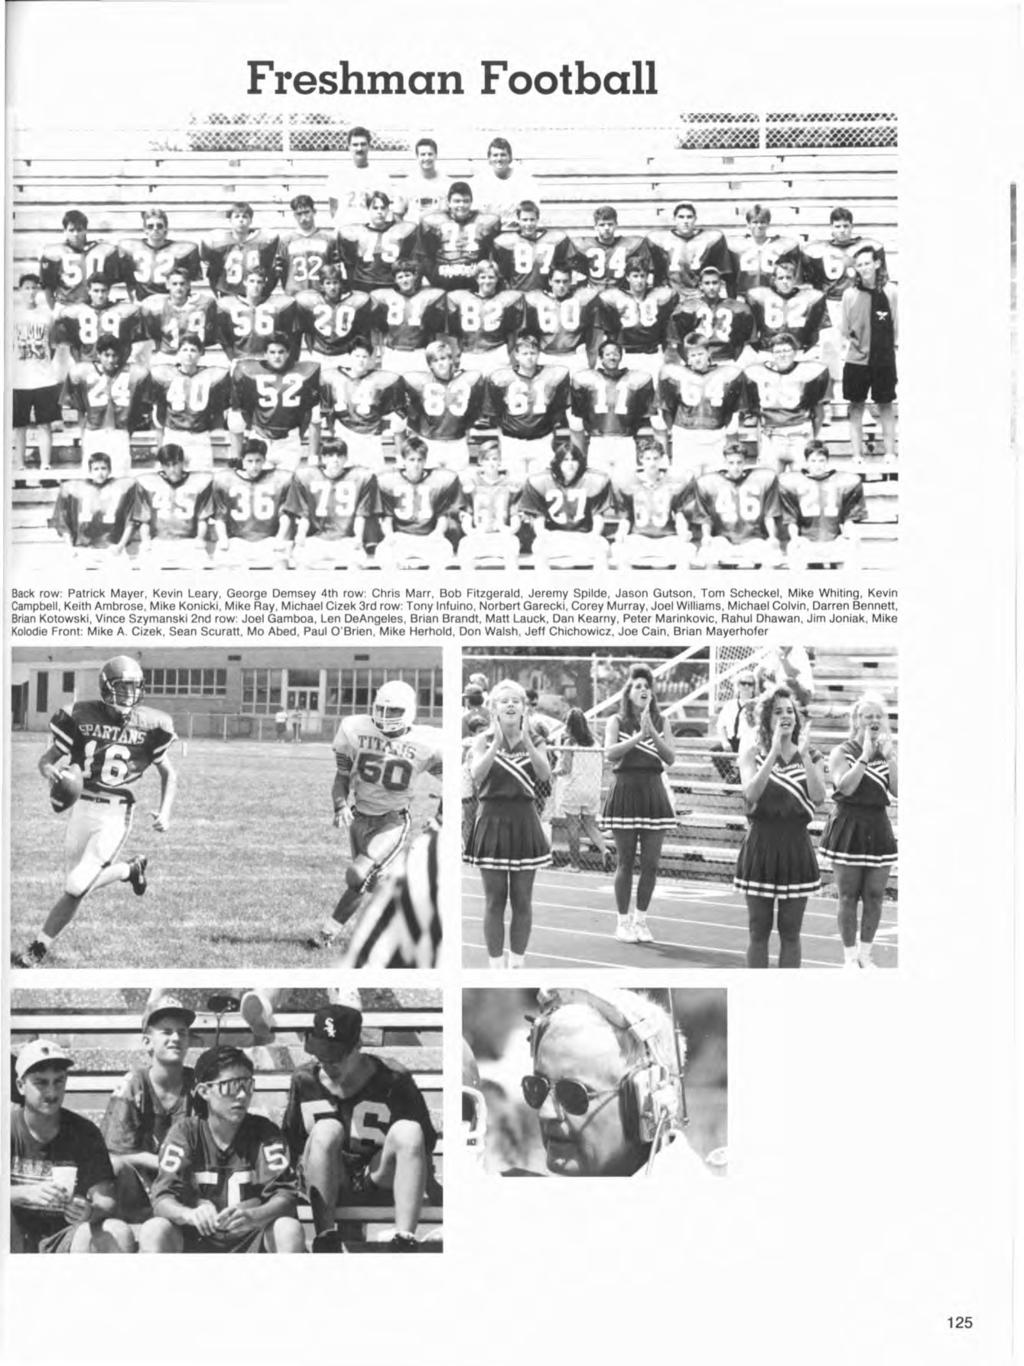 Freshntan Football Back row: Patrick Mayer, Kevin Leary, George Demsey 4th row: Chris Marr, Bob Fitzgerald, Jeremy Spilde, Jason Gutson, Tom Scheckel, Mike Whiting, Kevin Campbell, Keith Ambrose,